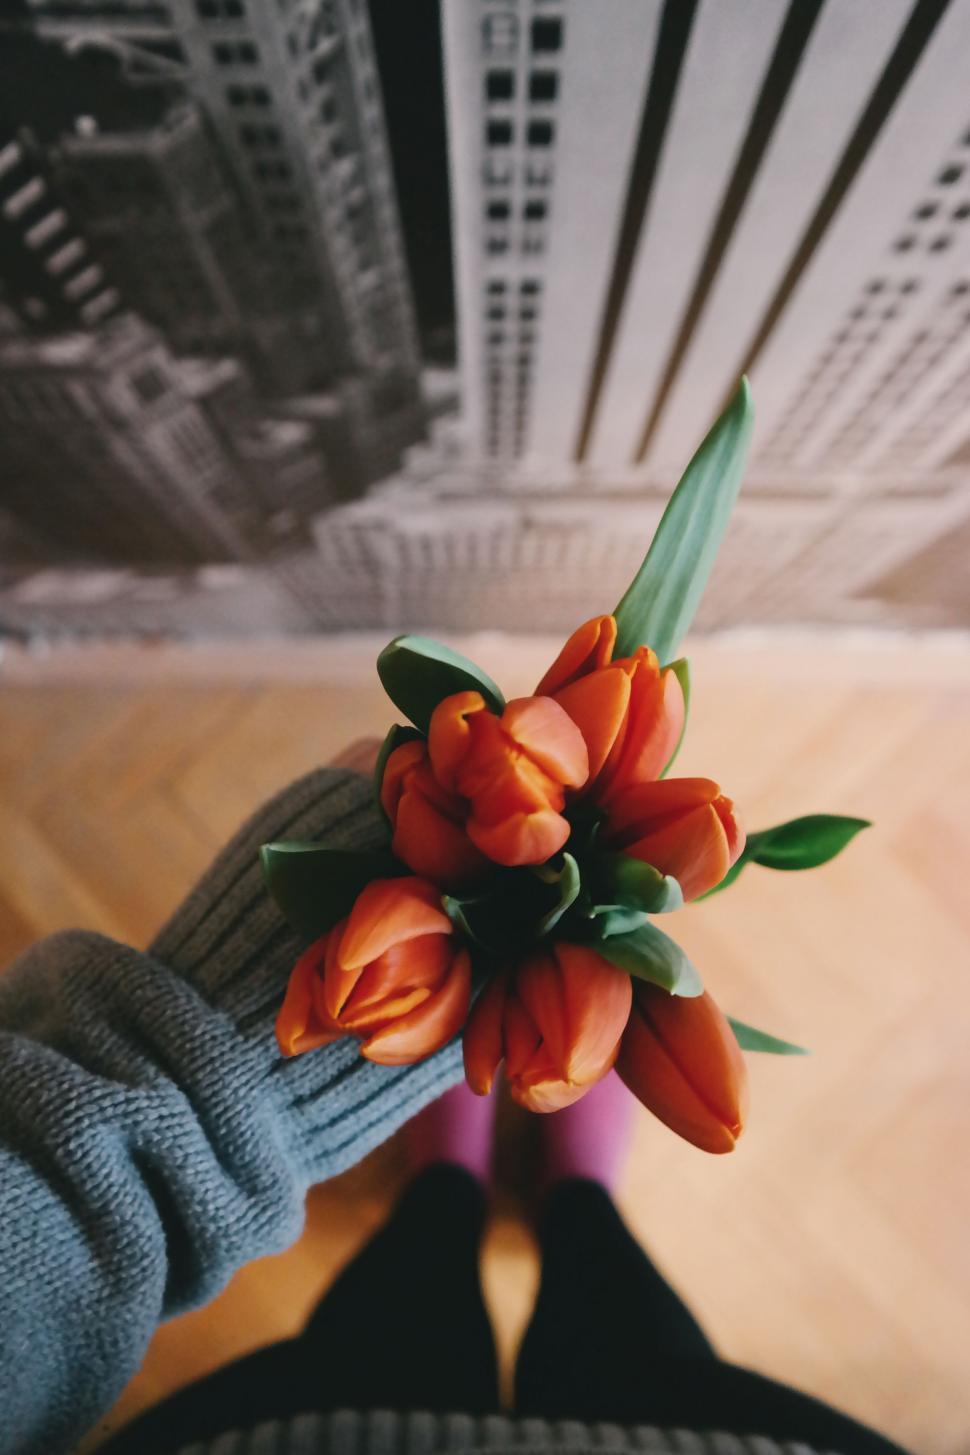 Free Image of Person Holding a Bouquet of Orange Flowers 